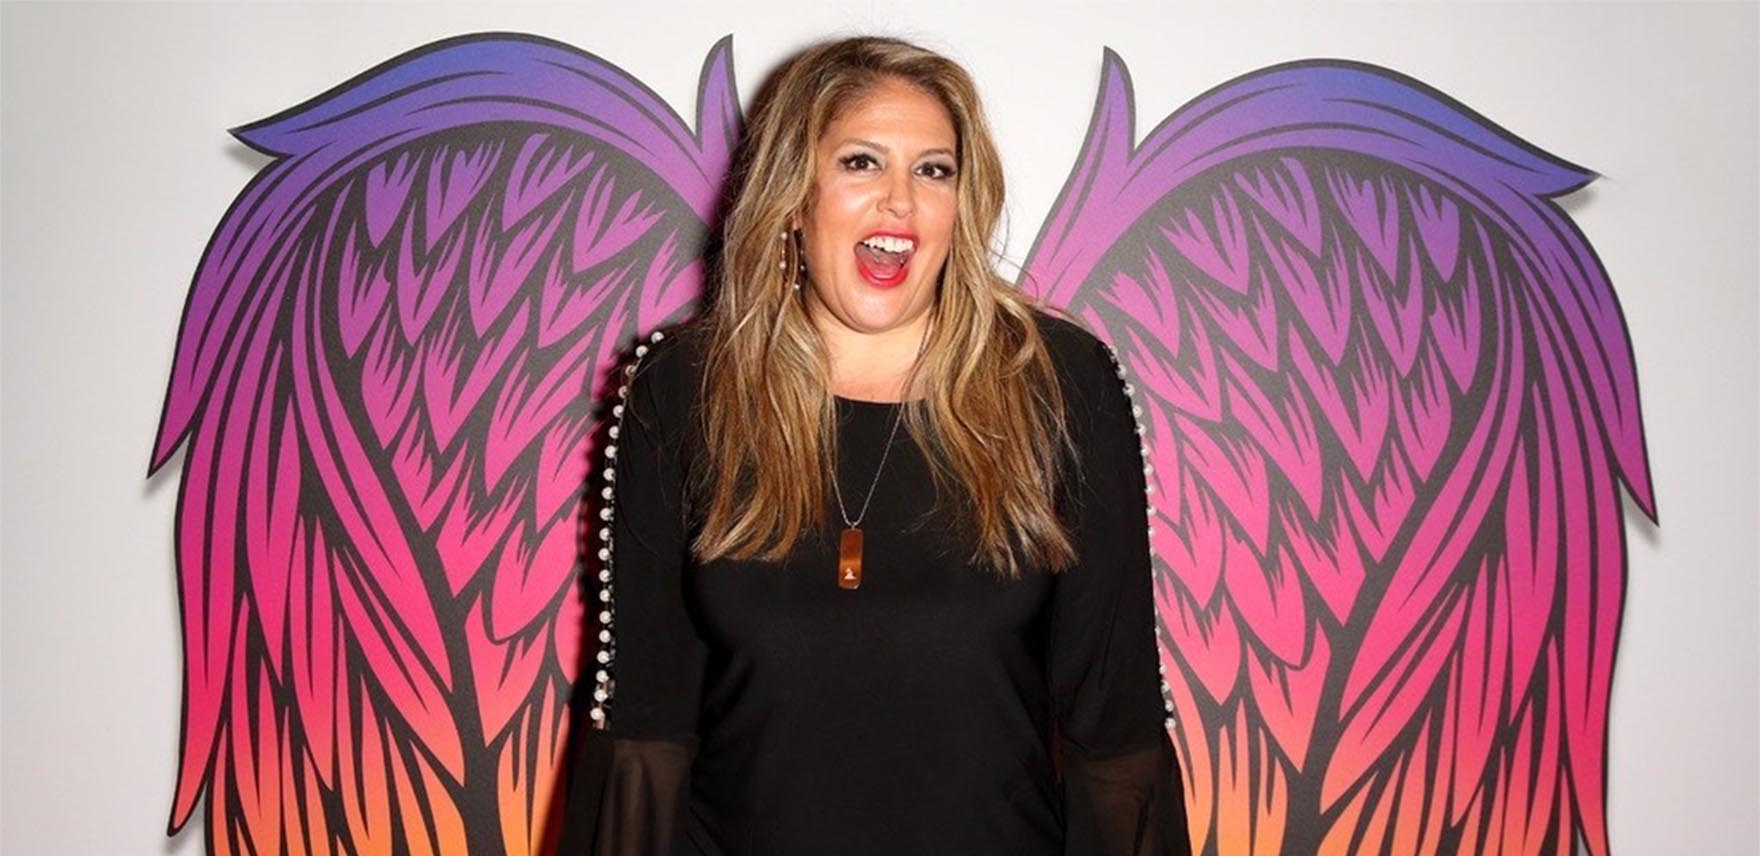 Lizza Monet Morales smiling in a black top with colorful wings behind her on a wall